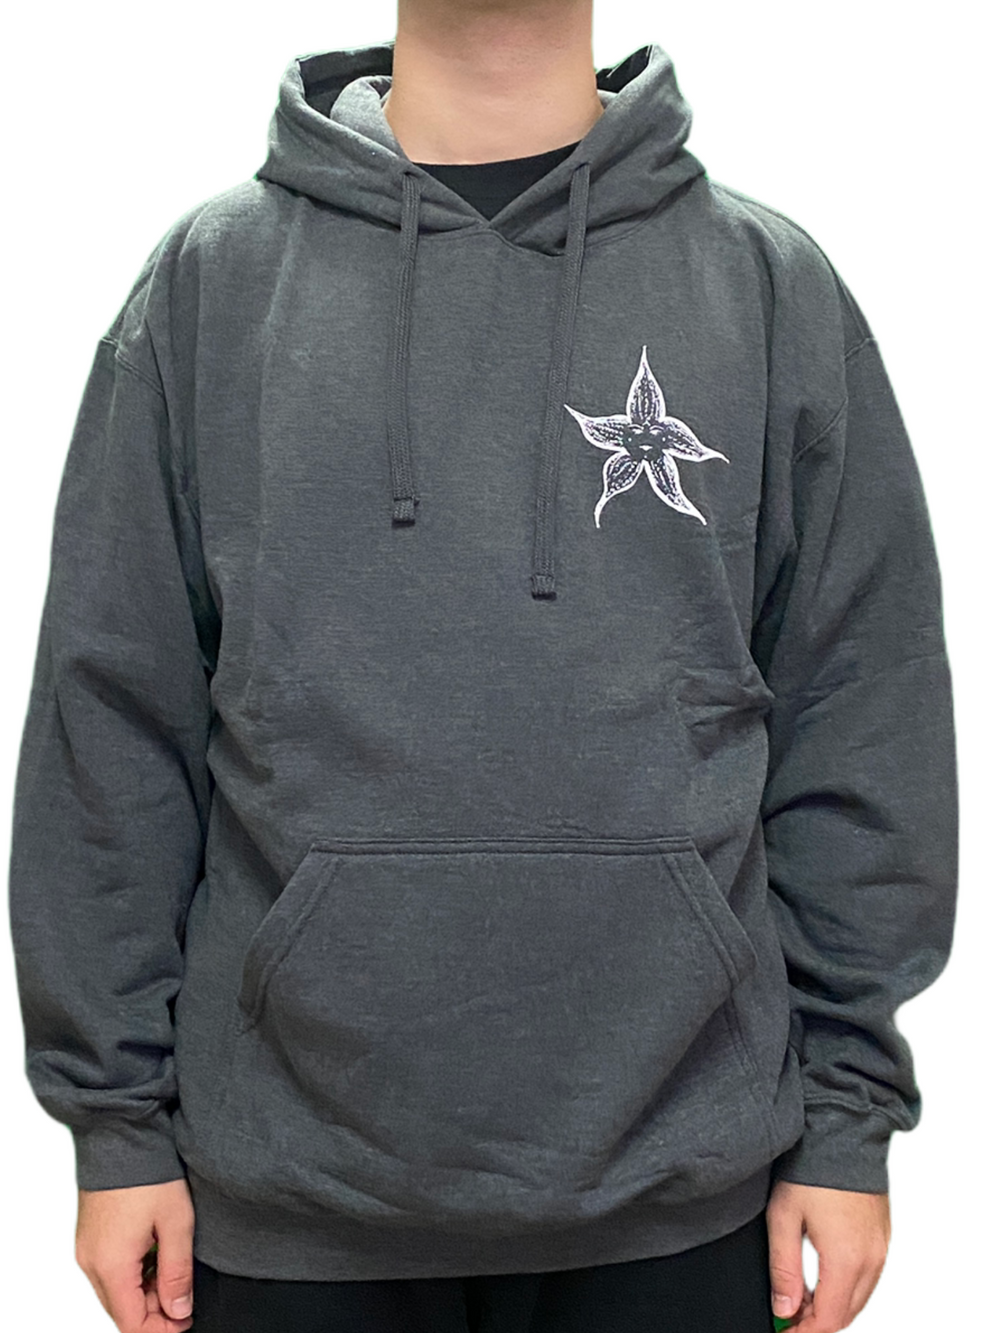 Prince – Starfish & Coffee USA Official Unisex Pullover Hoody Brand New Prince Charcoal